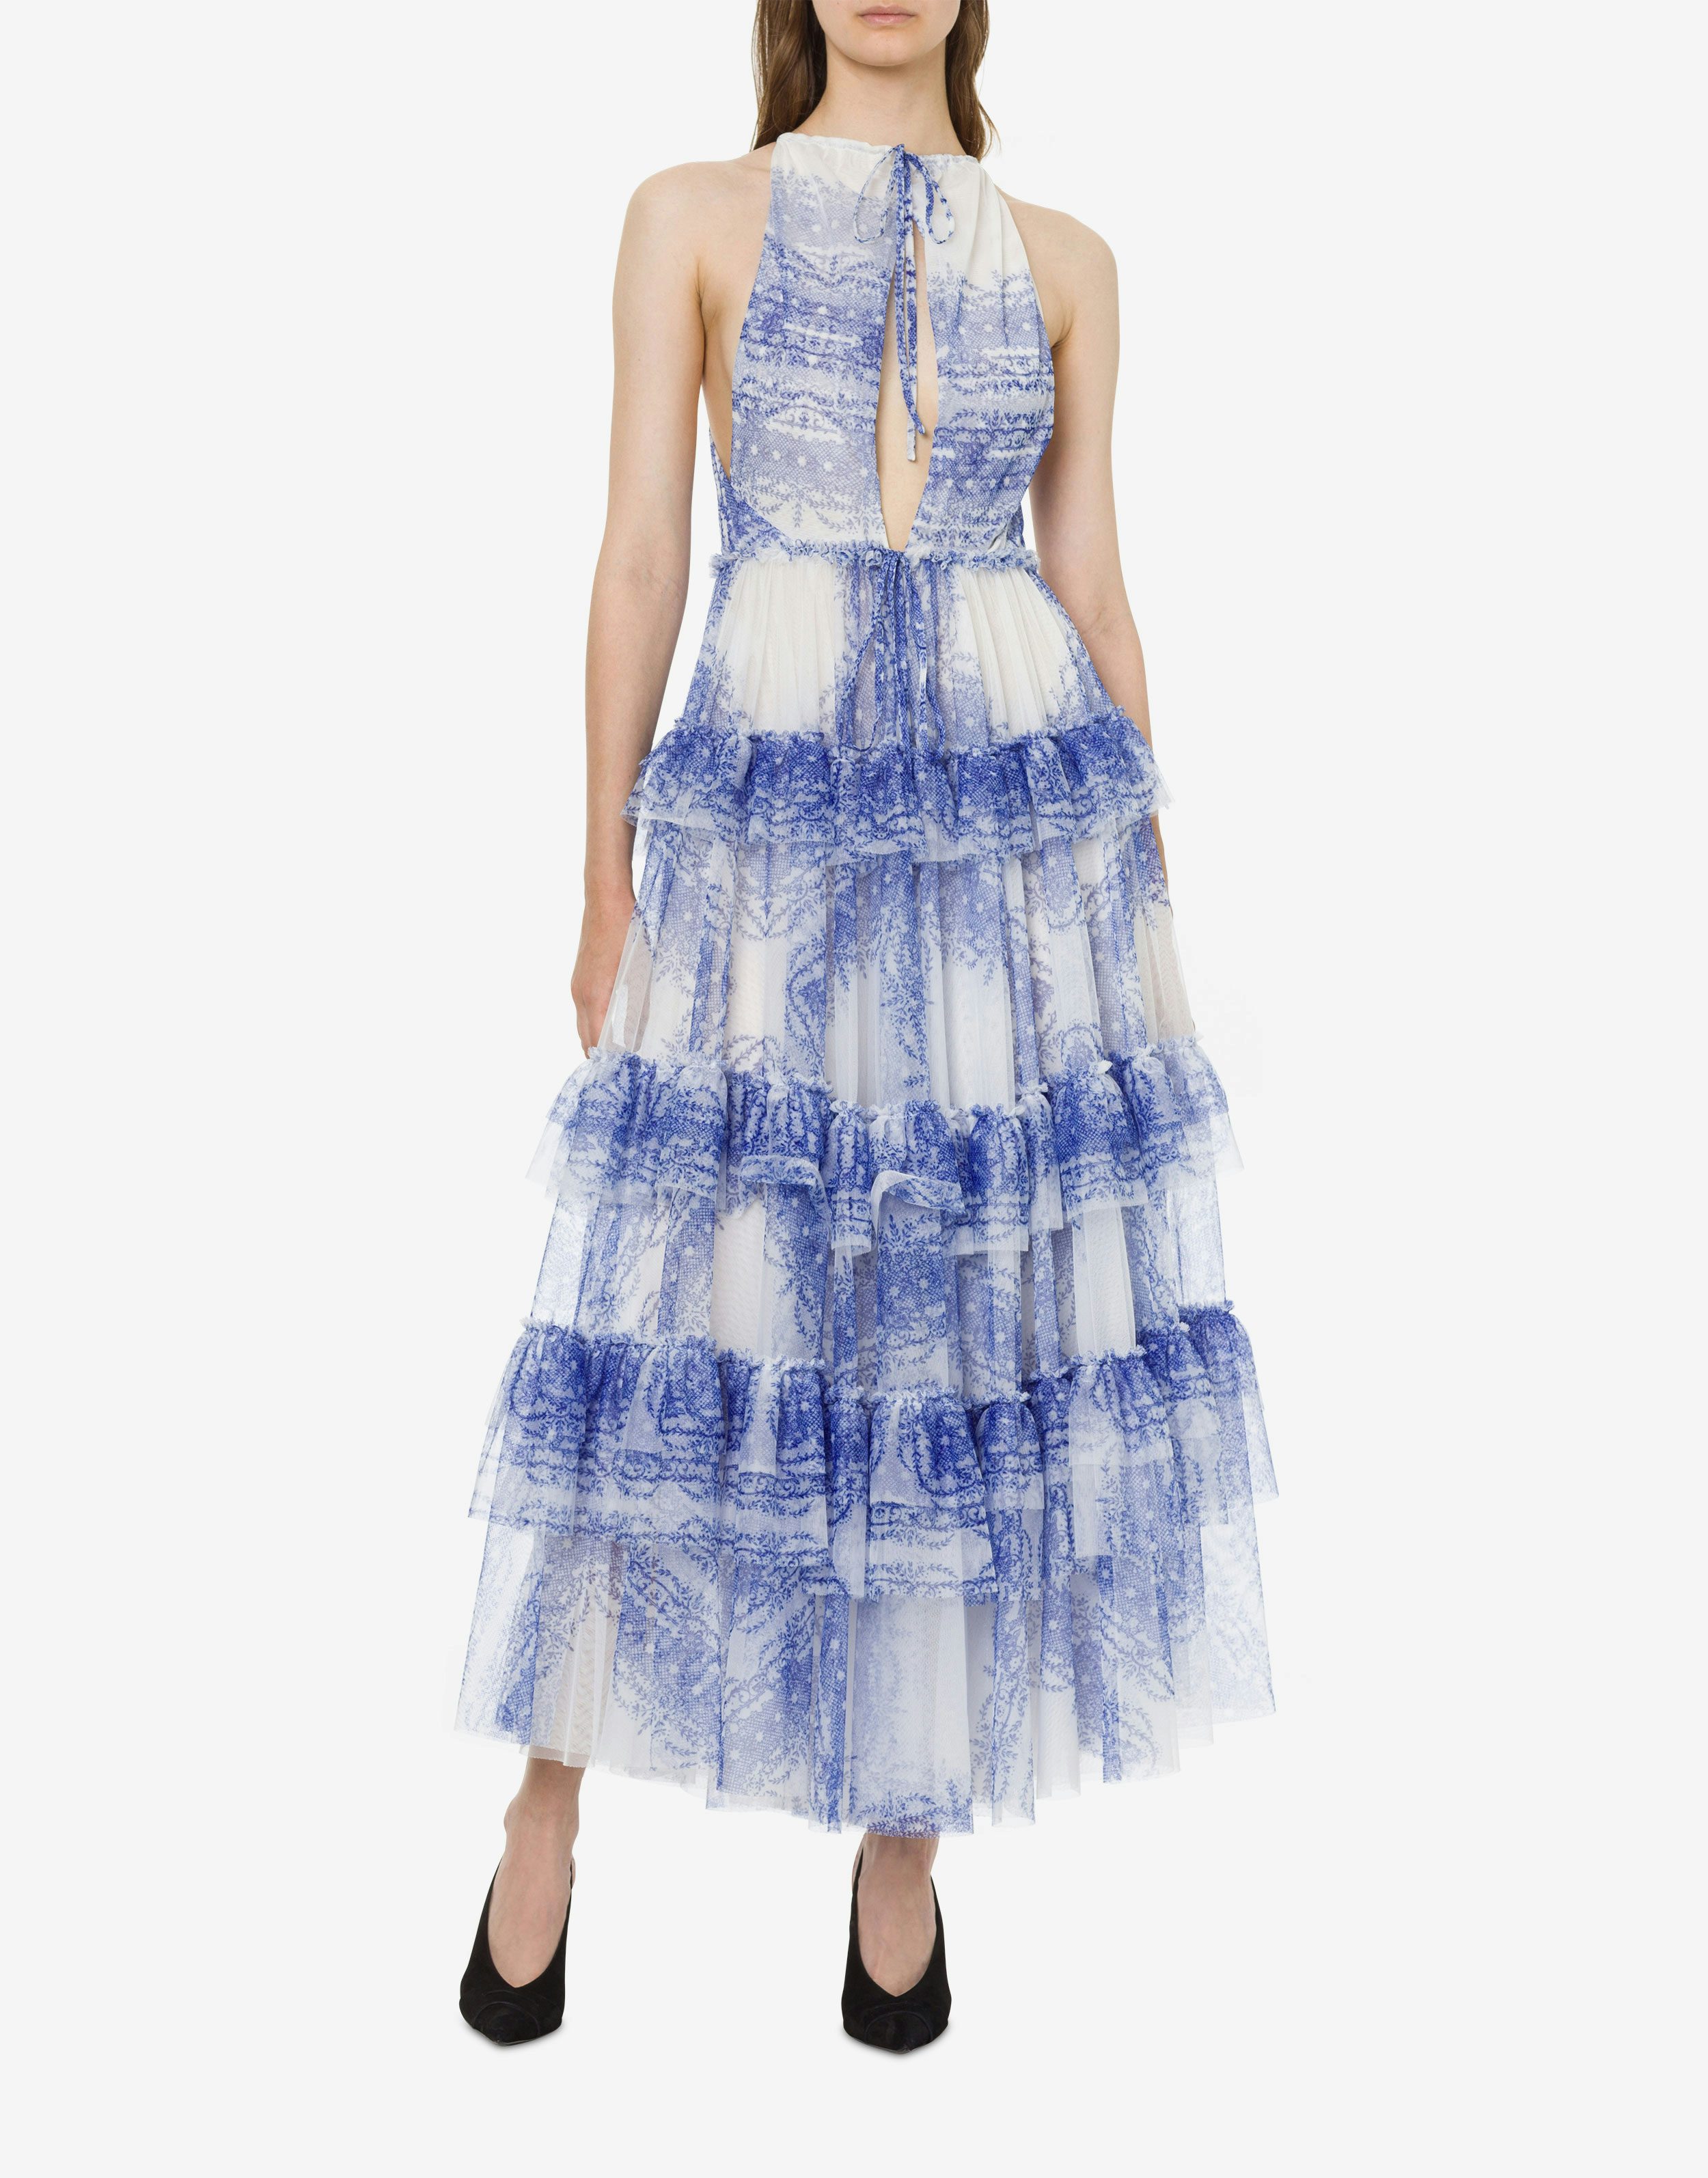 Ruffled dress in printed tulle